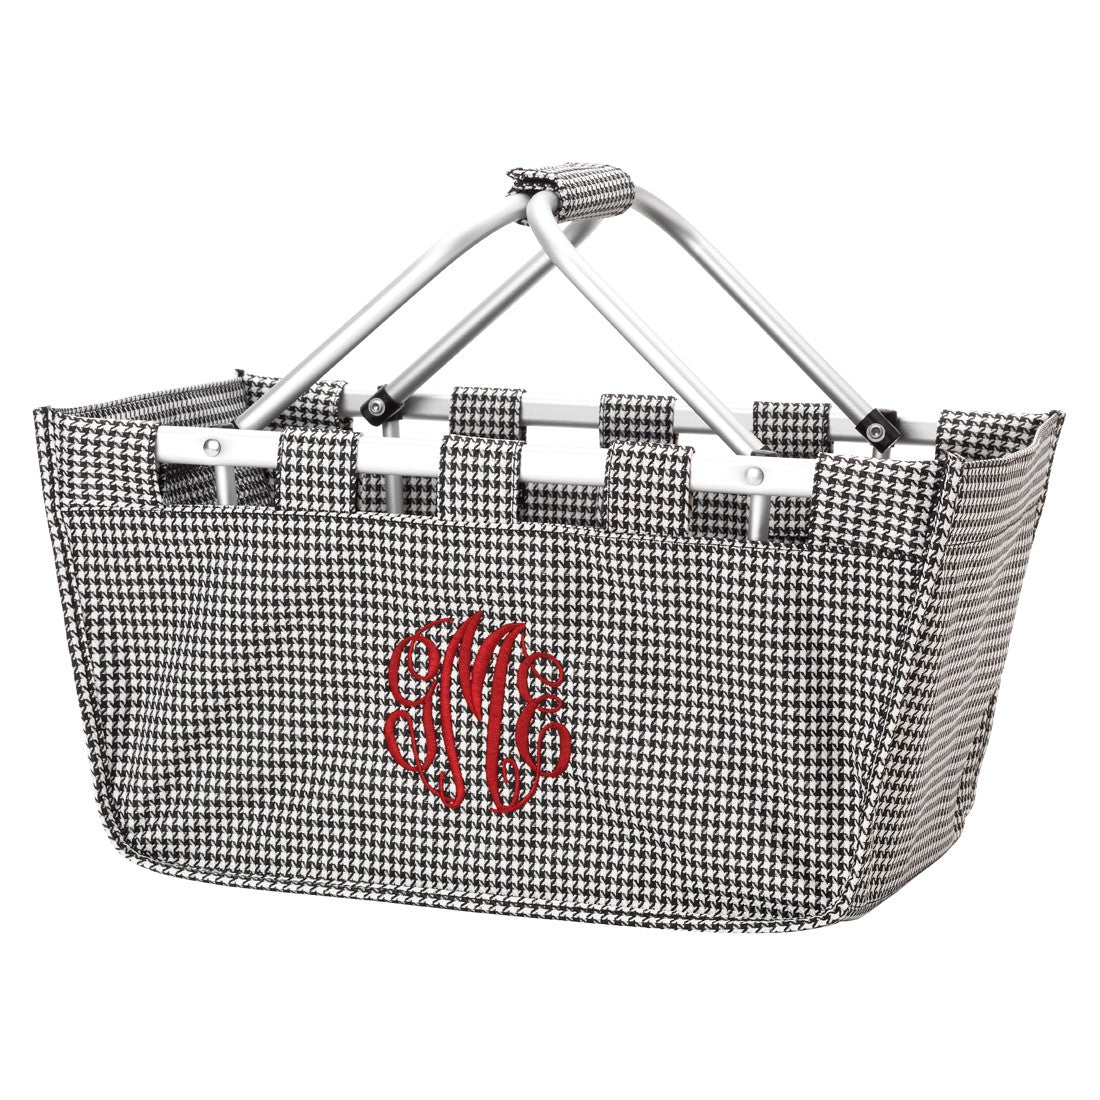 Houndstooth Market Tote - The perfect gift!